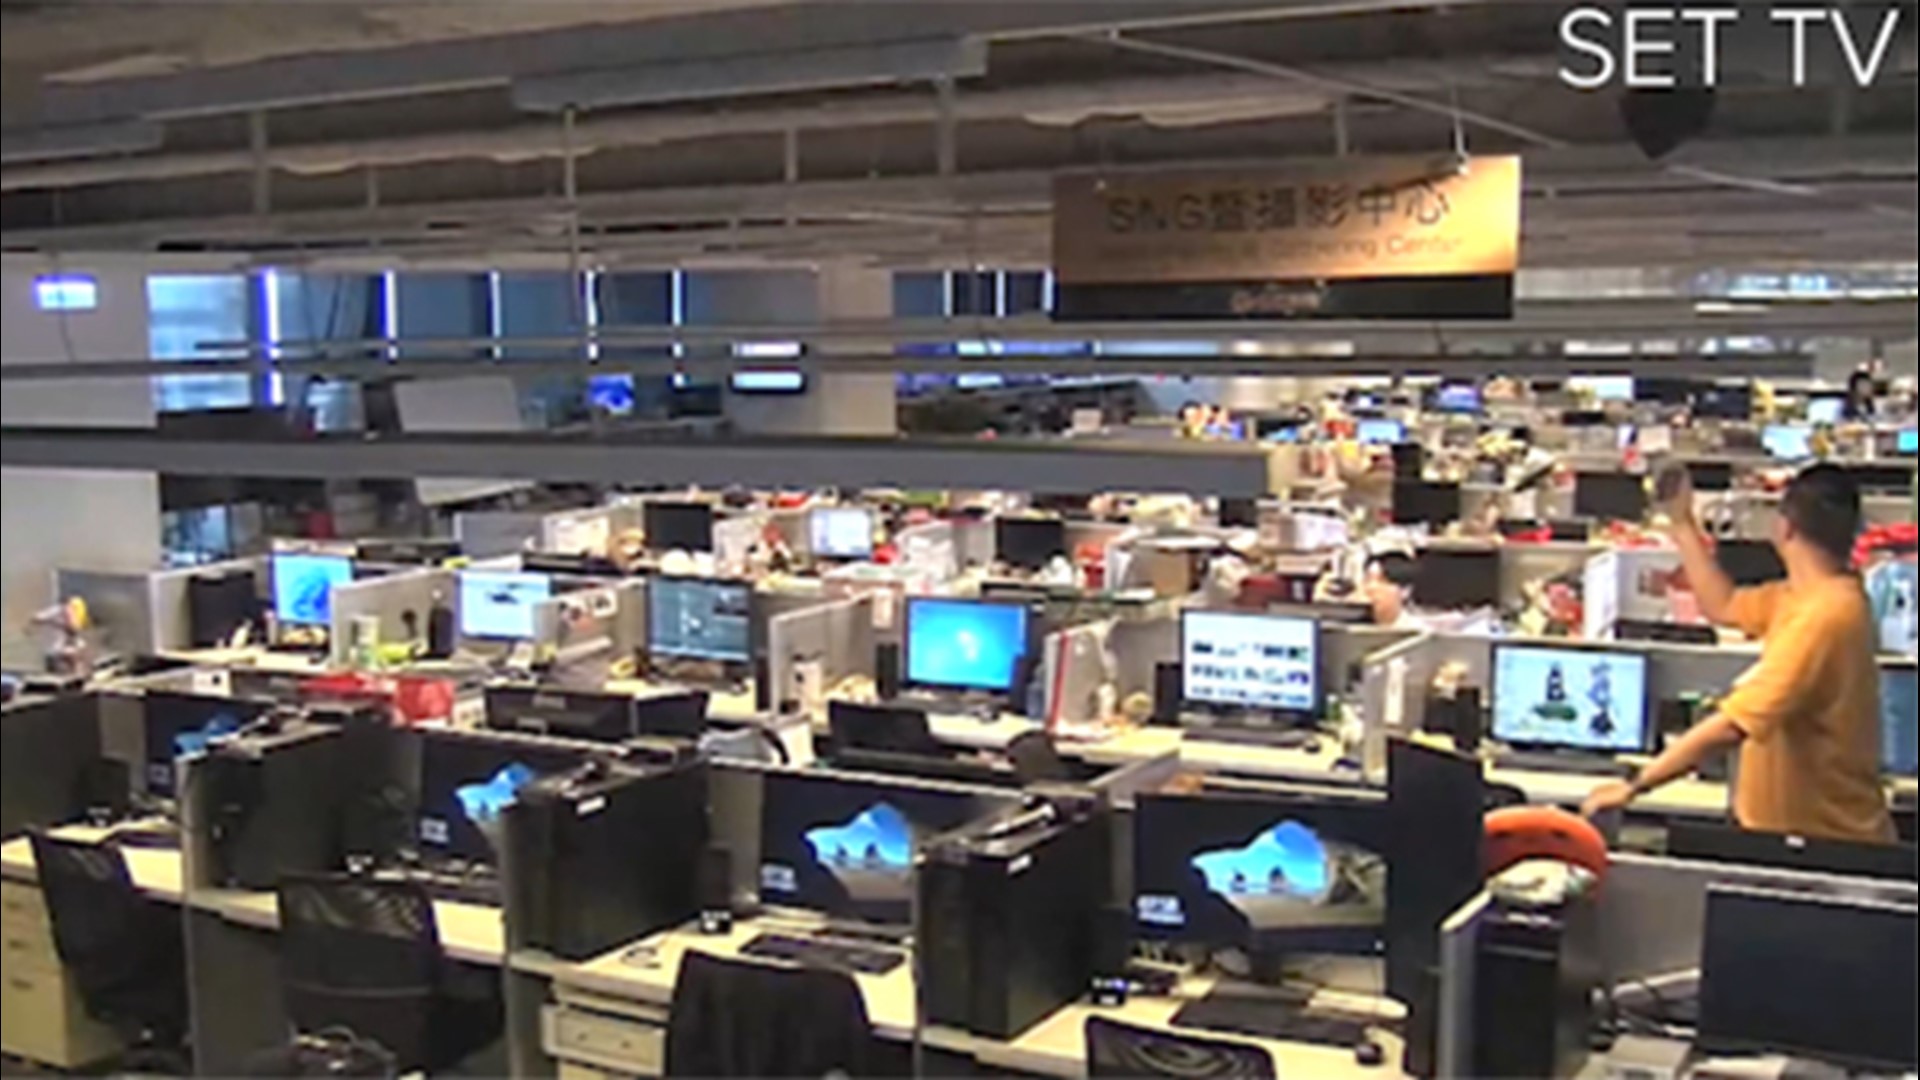 This video shows a newsroom in Taiwan during the 7.4 magnitude earthquake.